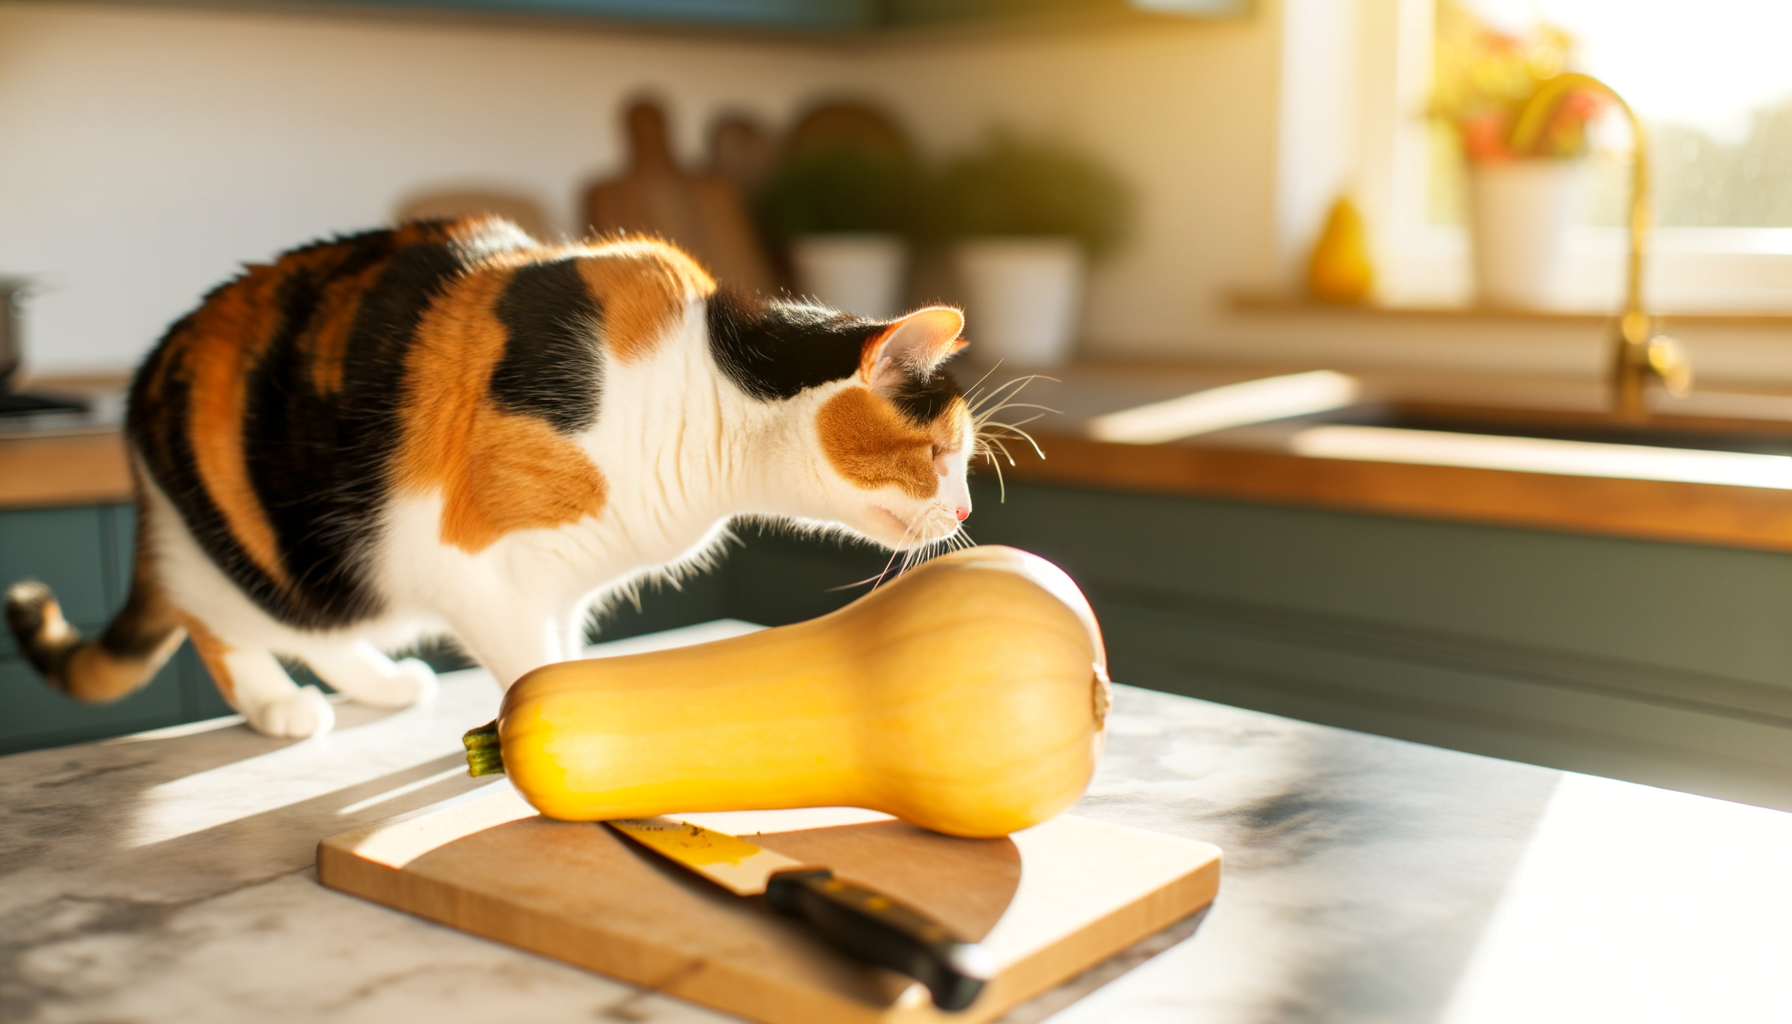 "Decoding Feline Diets: Can Cats Safely Munch on Squash?"